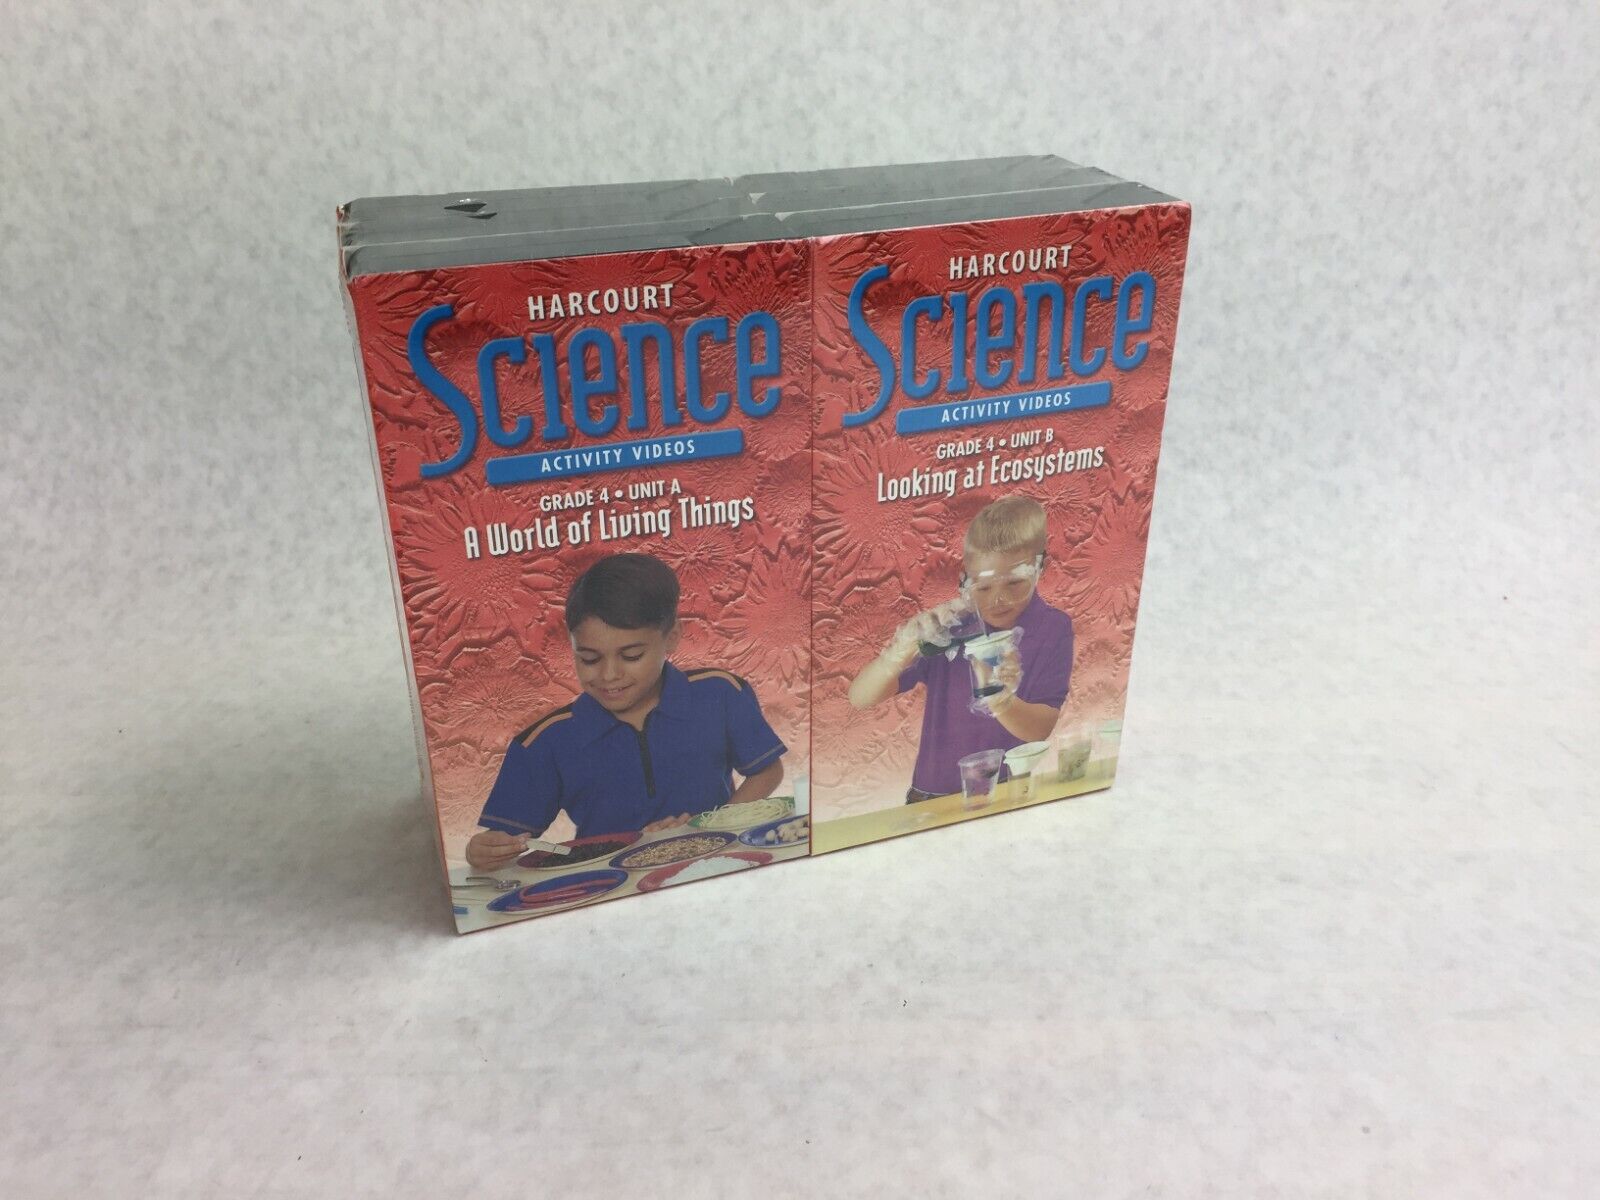 Harcourt Science Activity Videos Grade 4 Units A-F  Factory Sealed   6 VHS Tapes